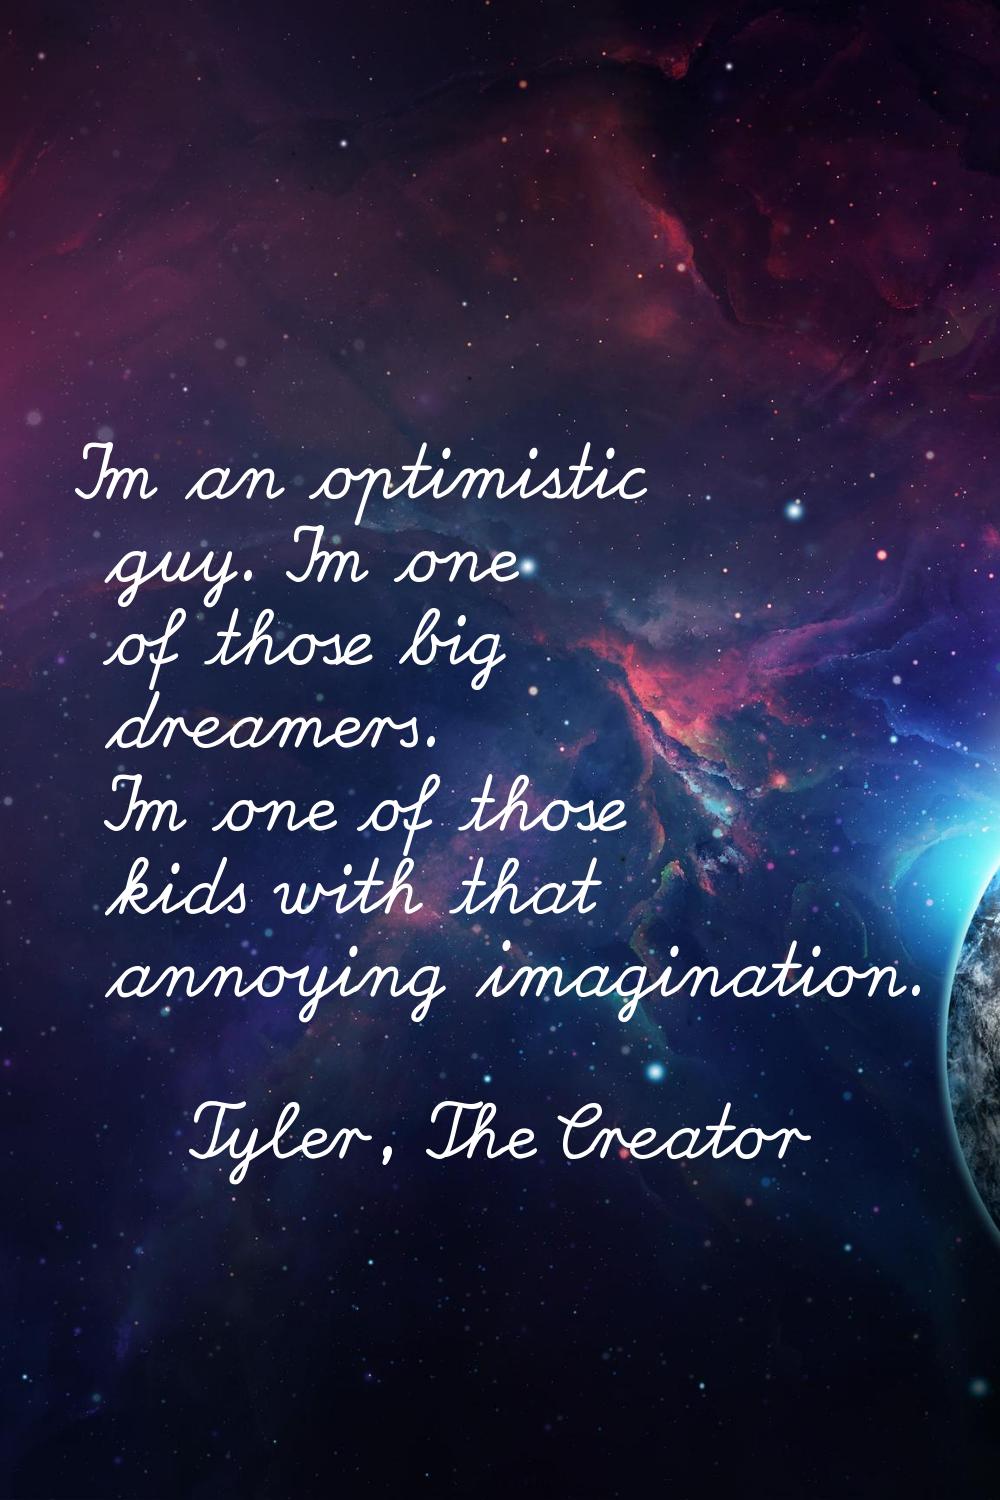 I'm an optimistic guy. I'm one of those big dreamers. I'm one of those kids with that annoying imag